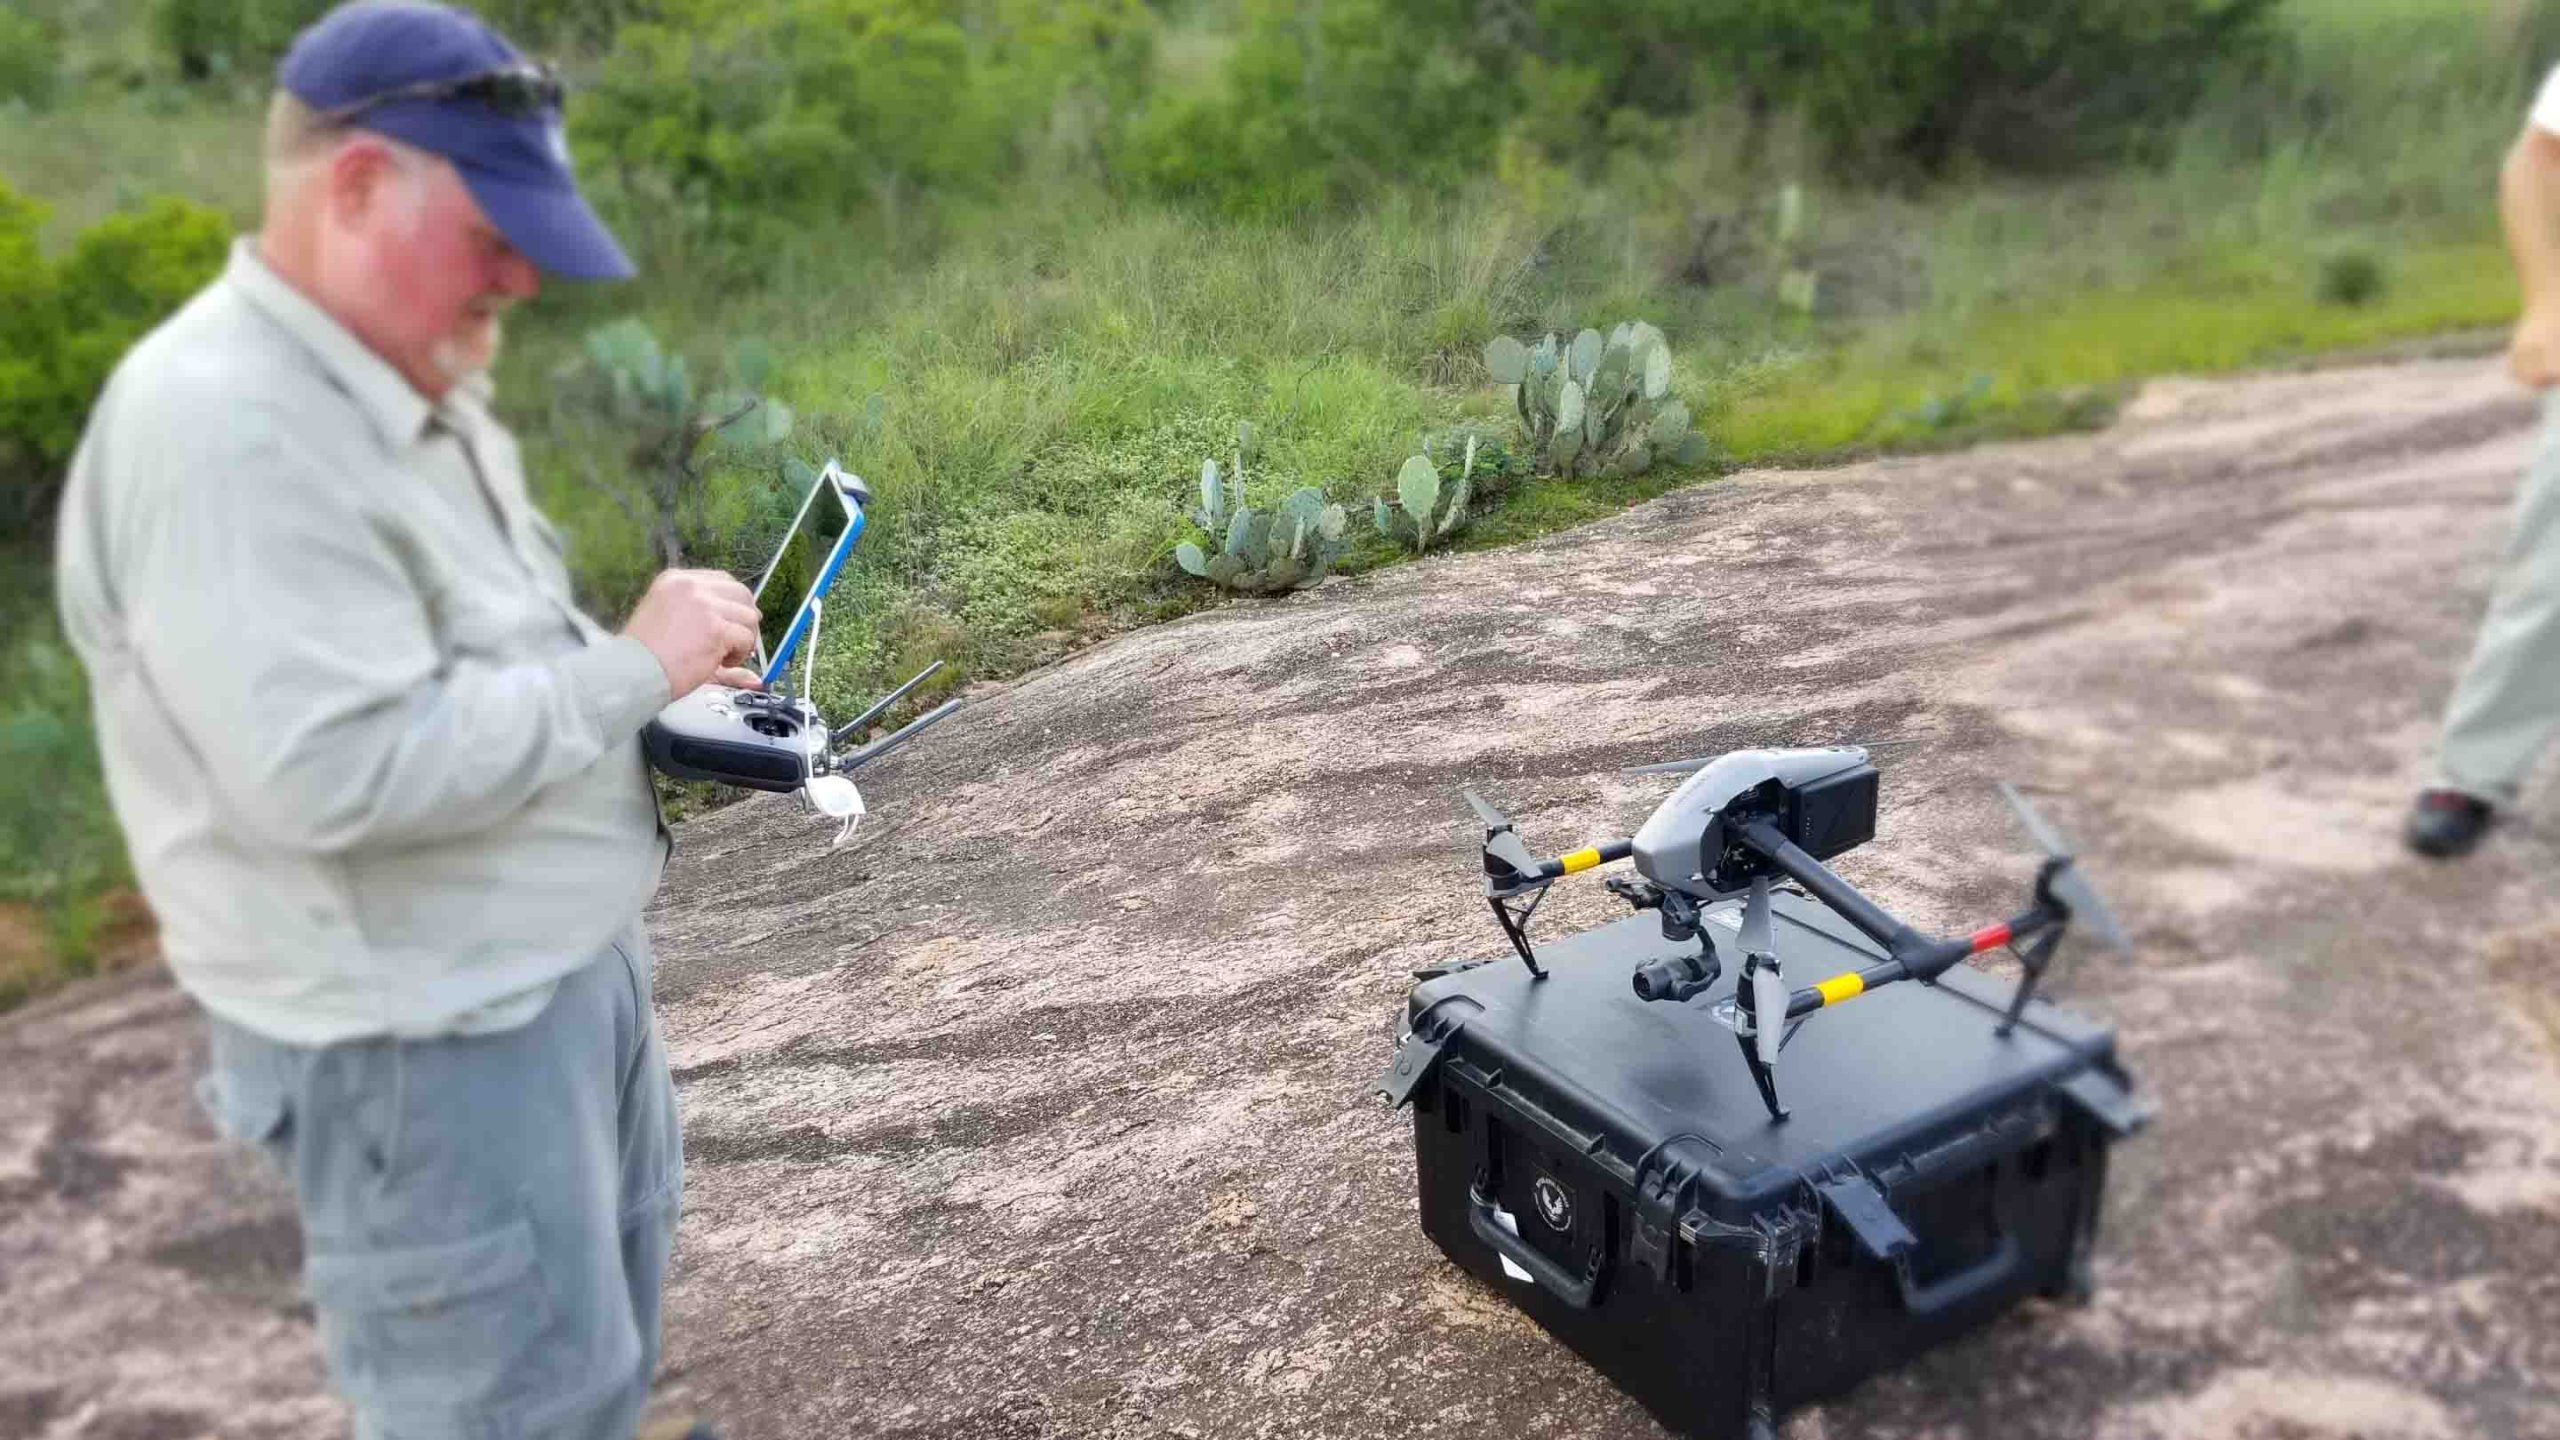 FIELD PHOTO - CASE STUDY - EOS TOOLS PRO - RAPTOR AERIAL SERVICES - ENCHANTED ROCK STATE NATURAL - drones, ipad; Michael Allison; Texas Drone Consultancy Uses Arrow Gold for Ground Control Points (GCP)